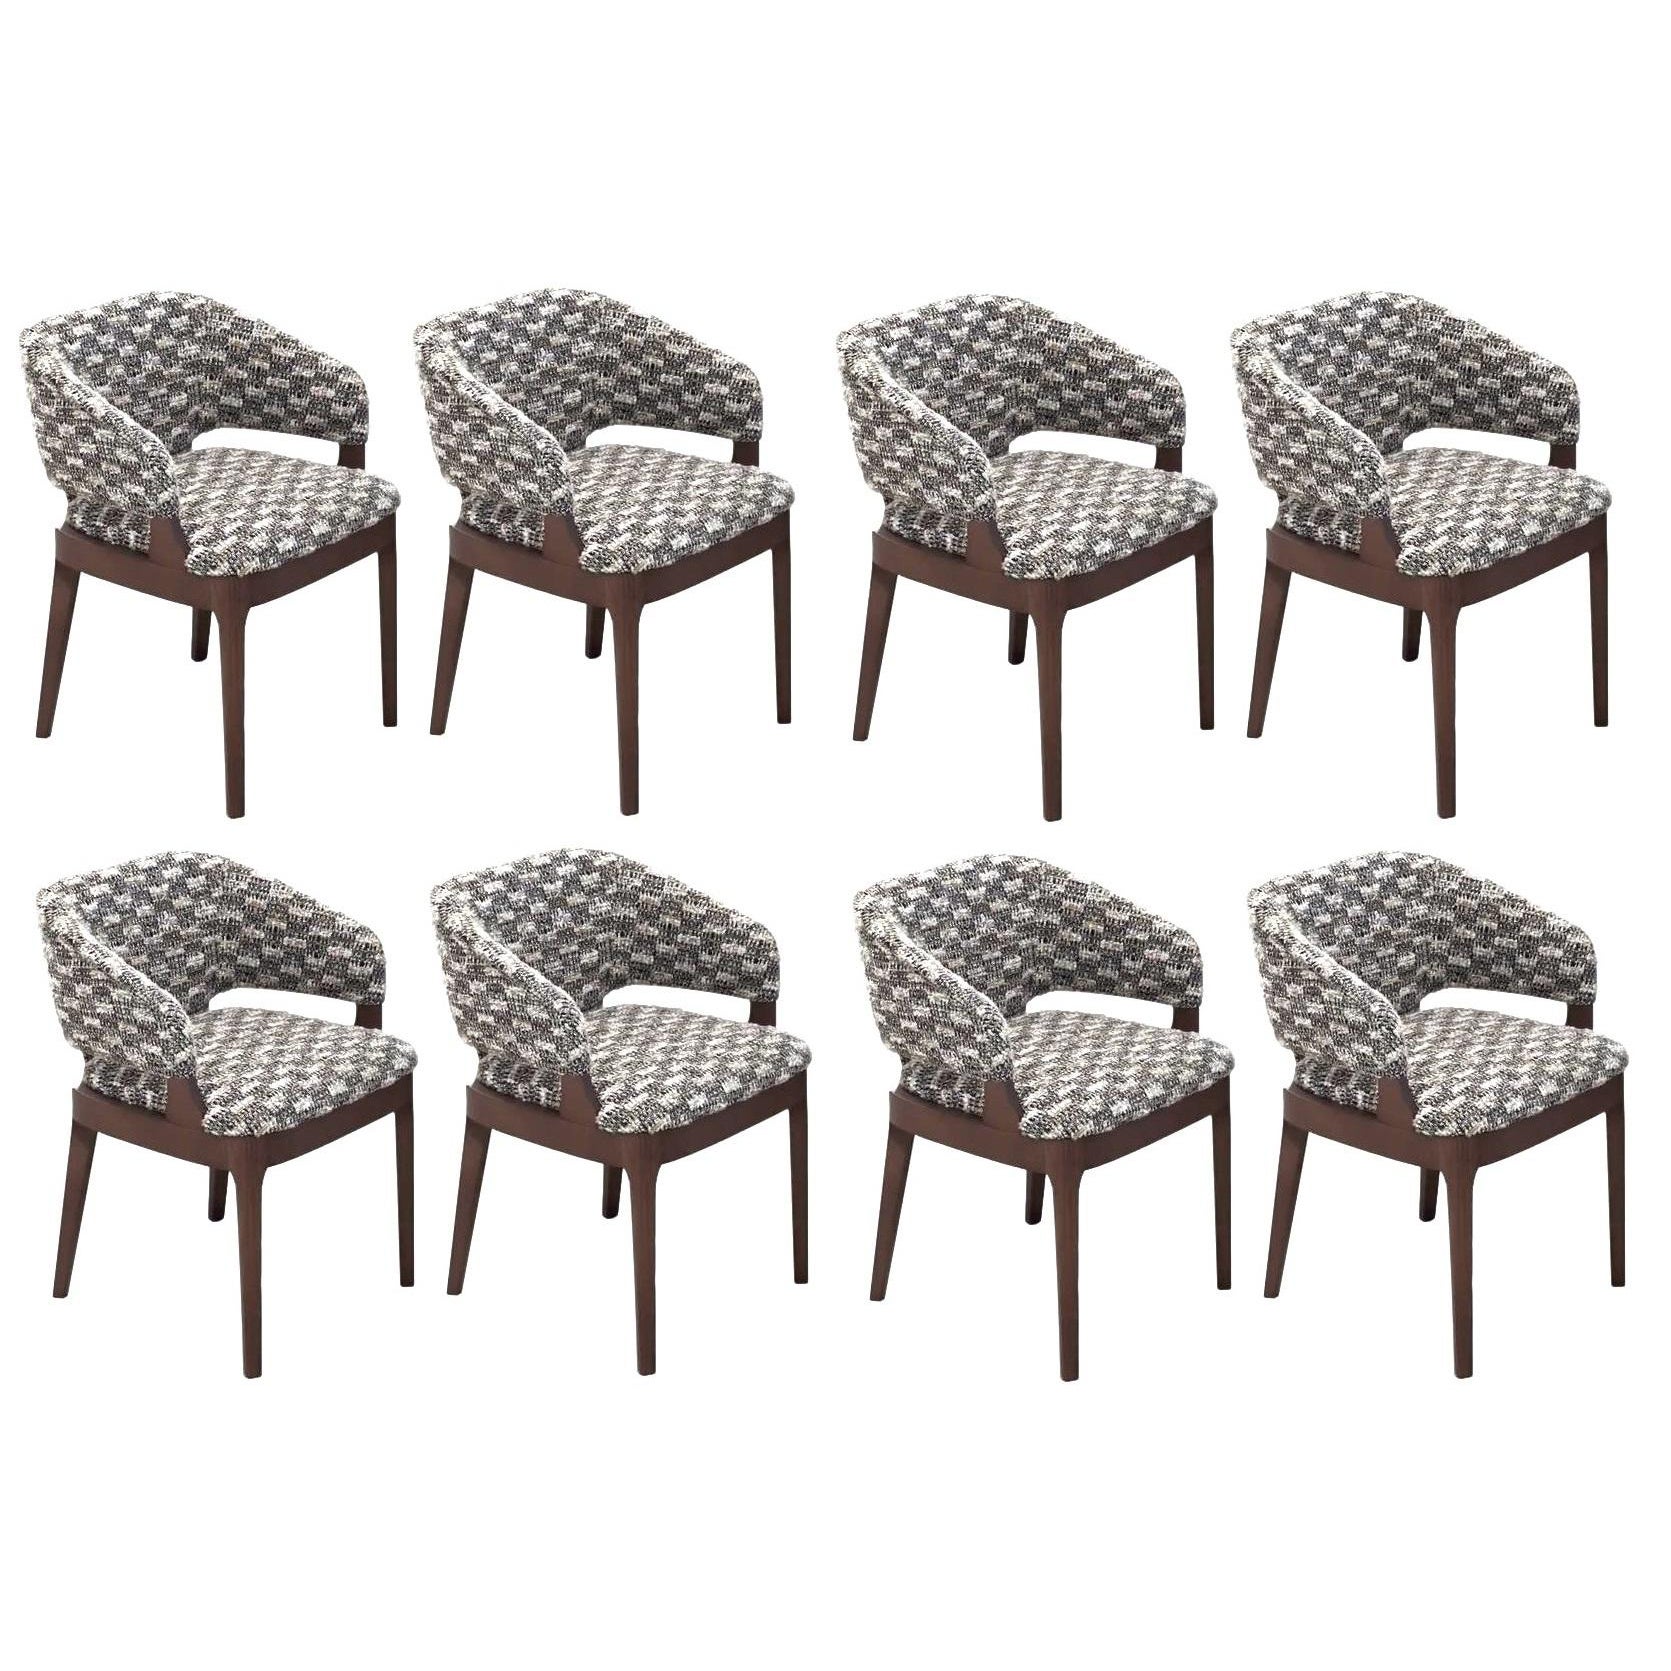 Set of 8 Dining Chair With Arms Offered In COM